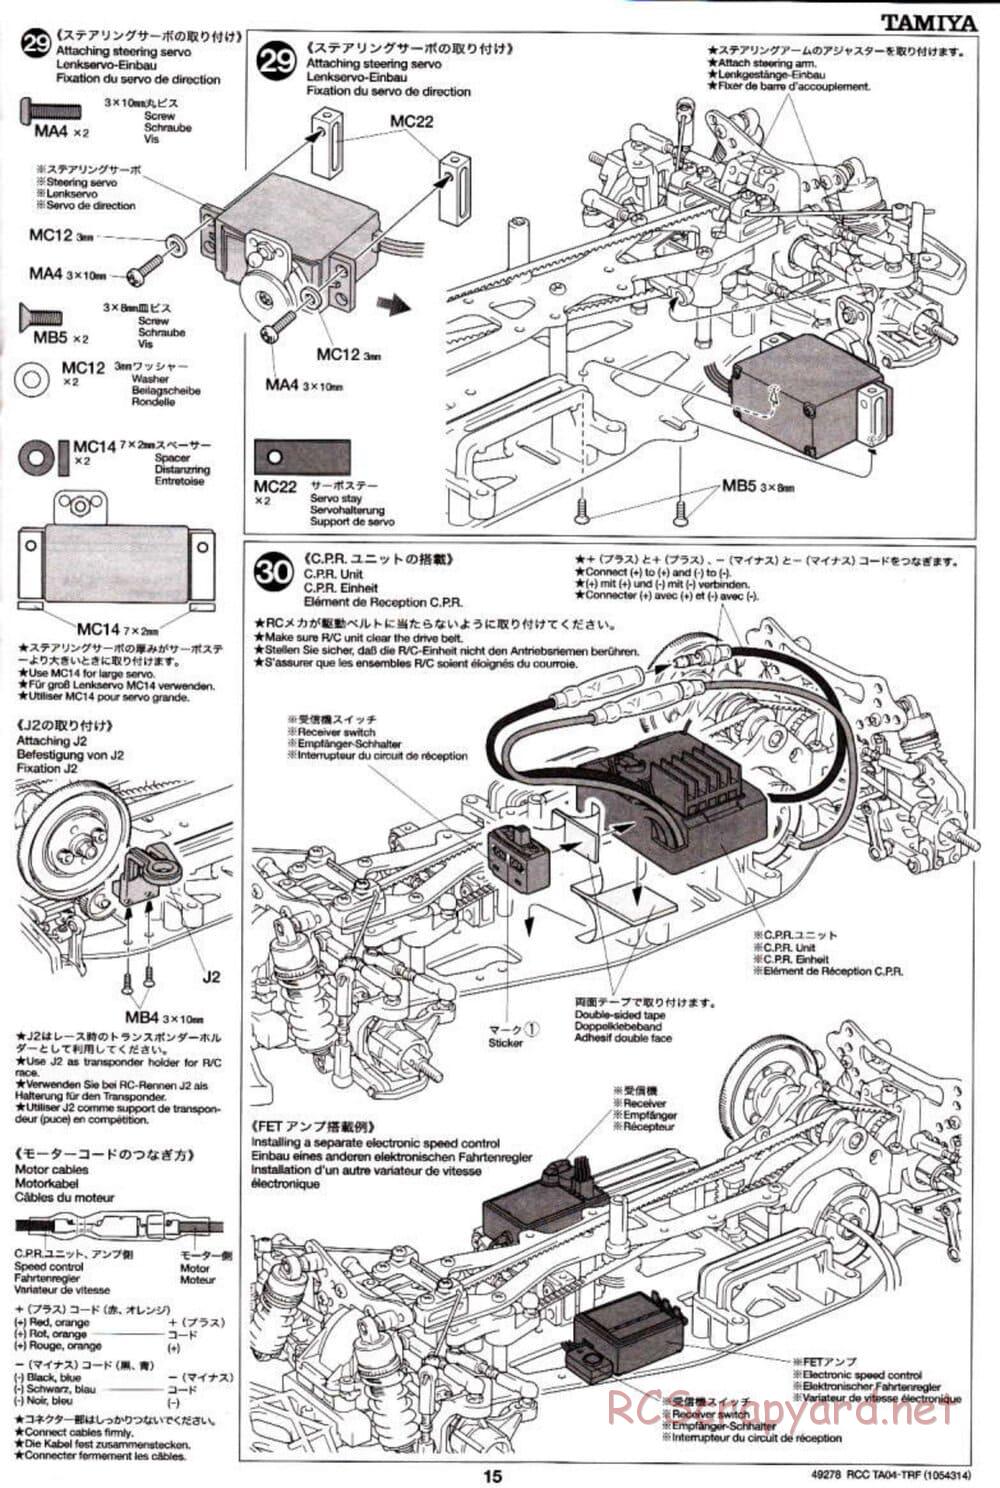 Tamiya - TA-04 TRF Special Chassis Chassis - Manual - Page 15